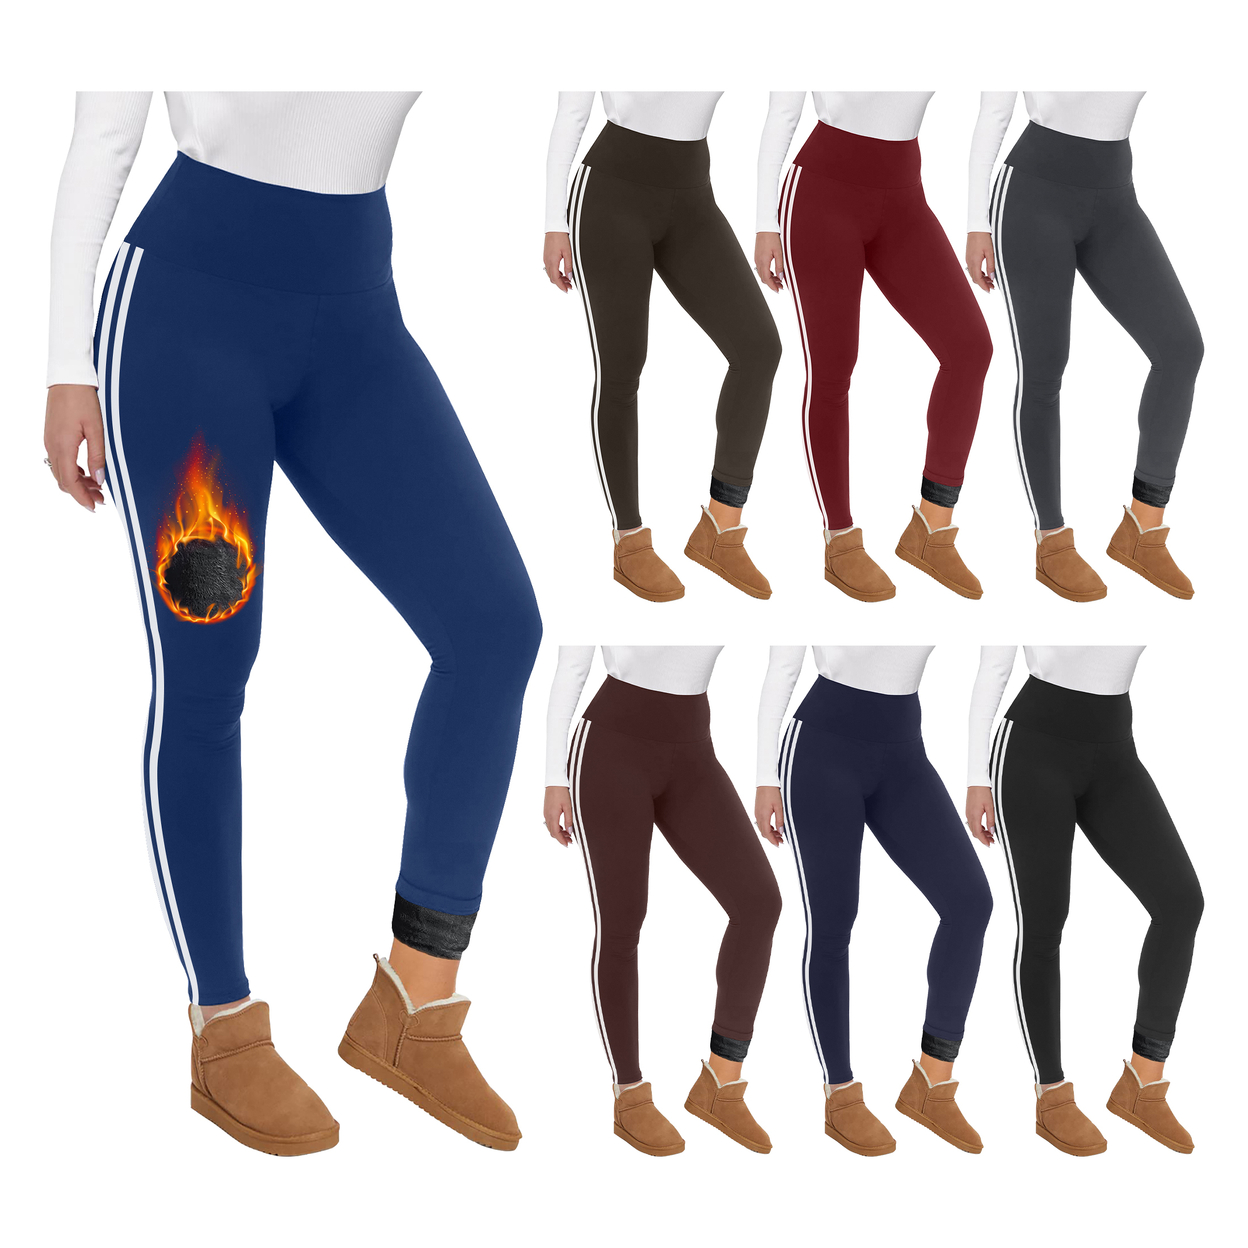 Multi-Pack: Women's Ultra Soft Winter Warm Cozy Striped Fur Lined Yoga Leggings - 3-pack, Assorted, Small